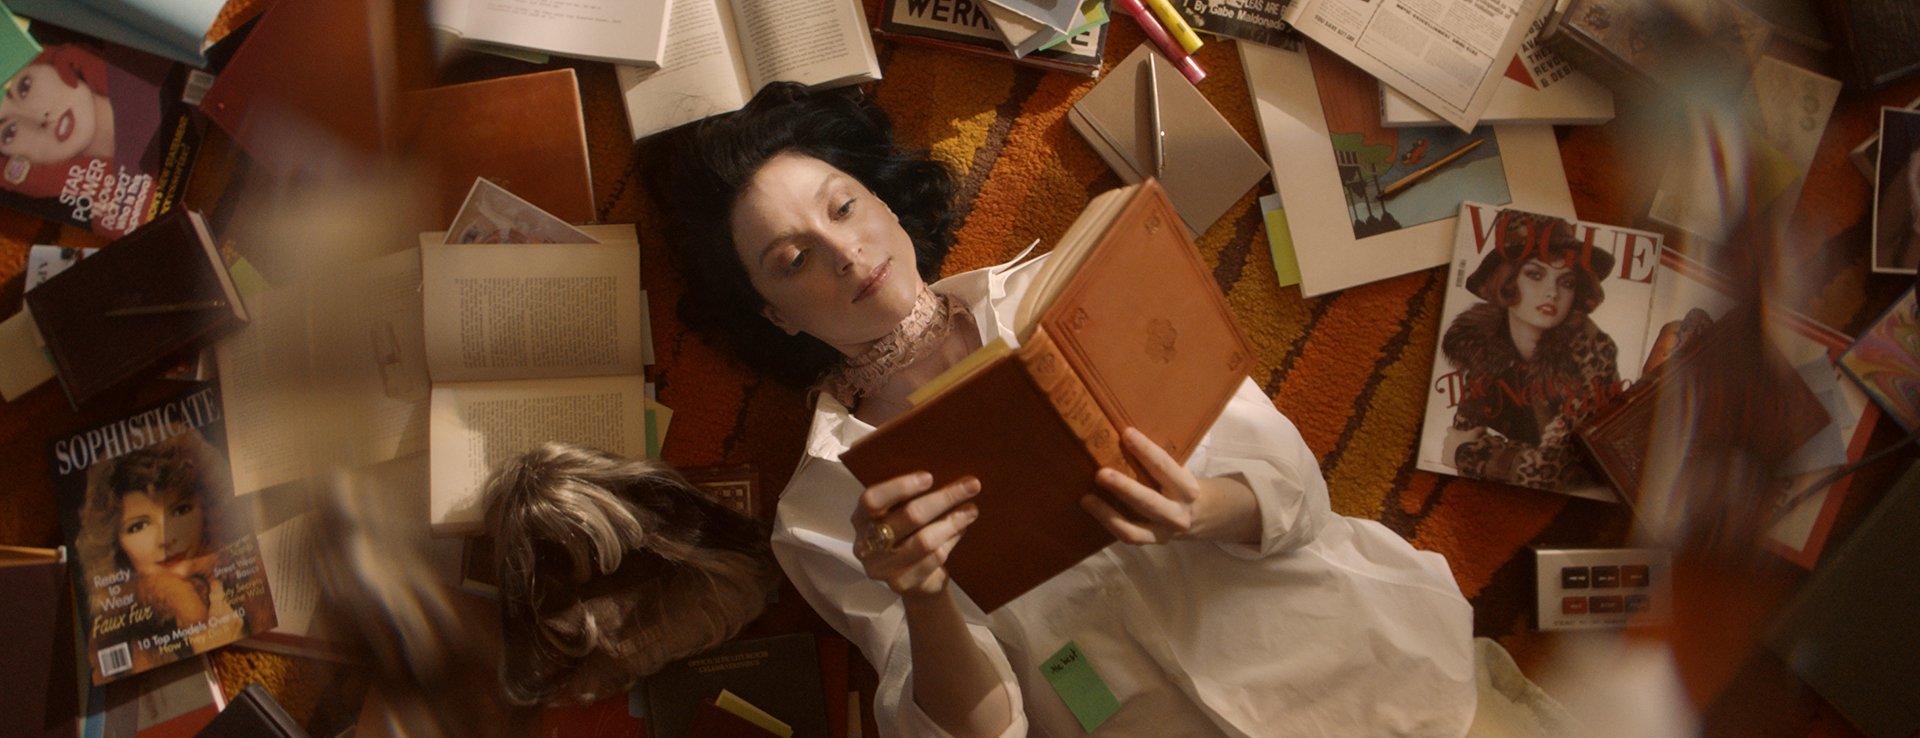 St. Vincent lies on a brightly-carpeted floor in a cozy space. She is surrounded by books and reading a novel.